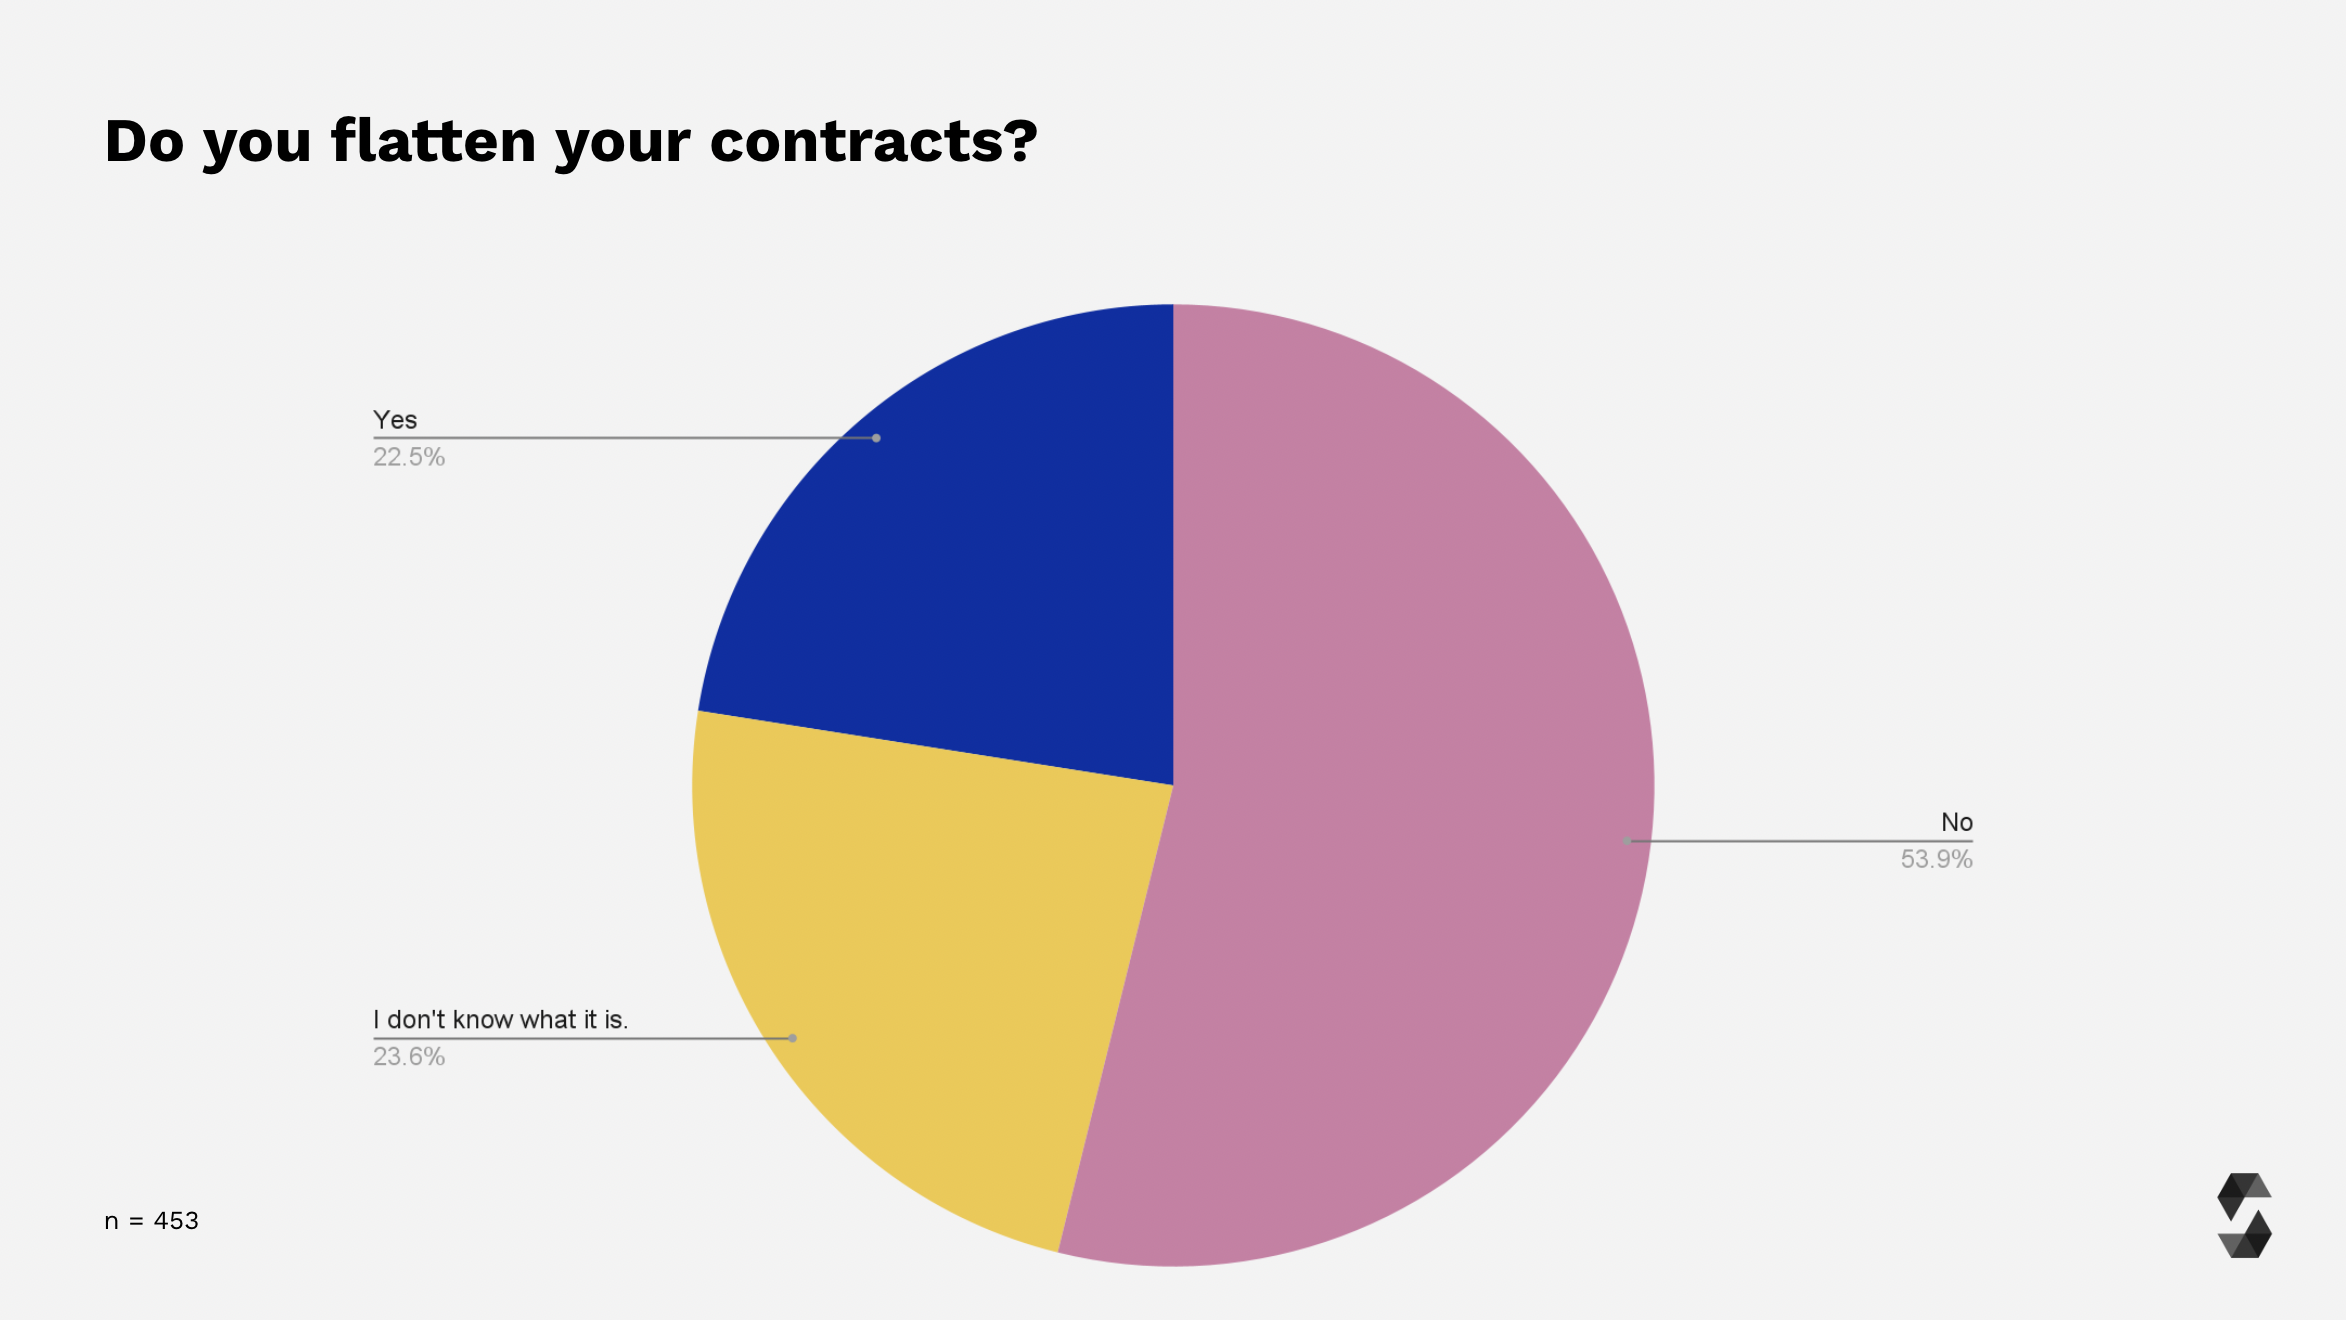 Flattening of contracts